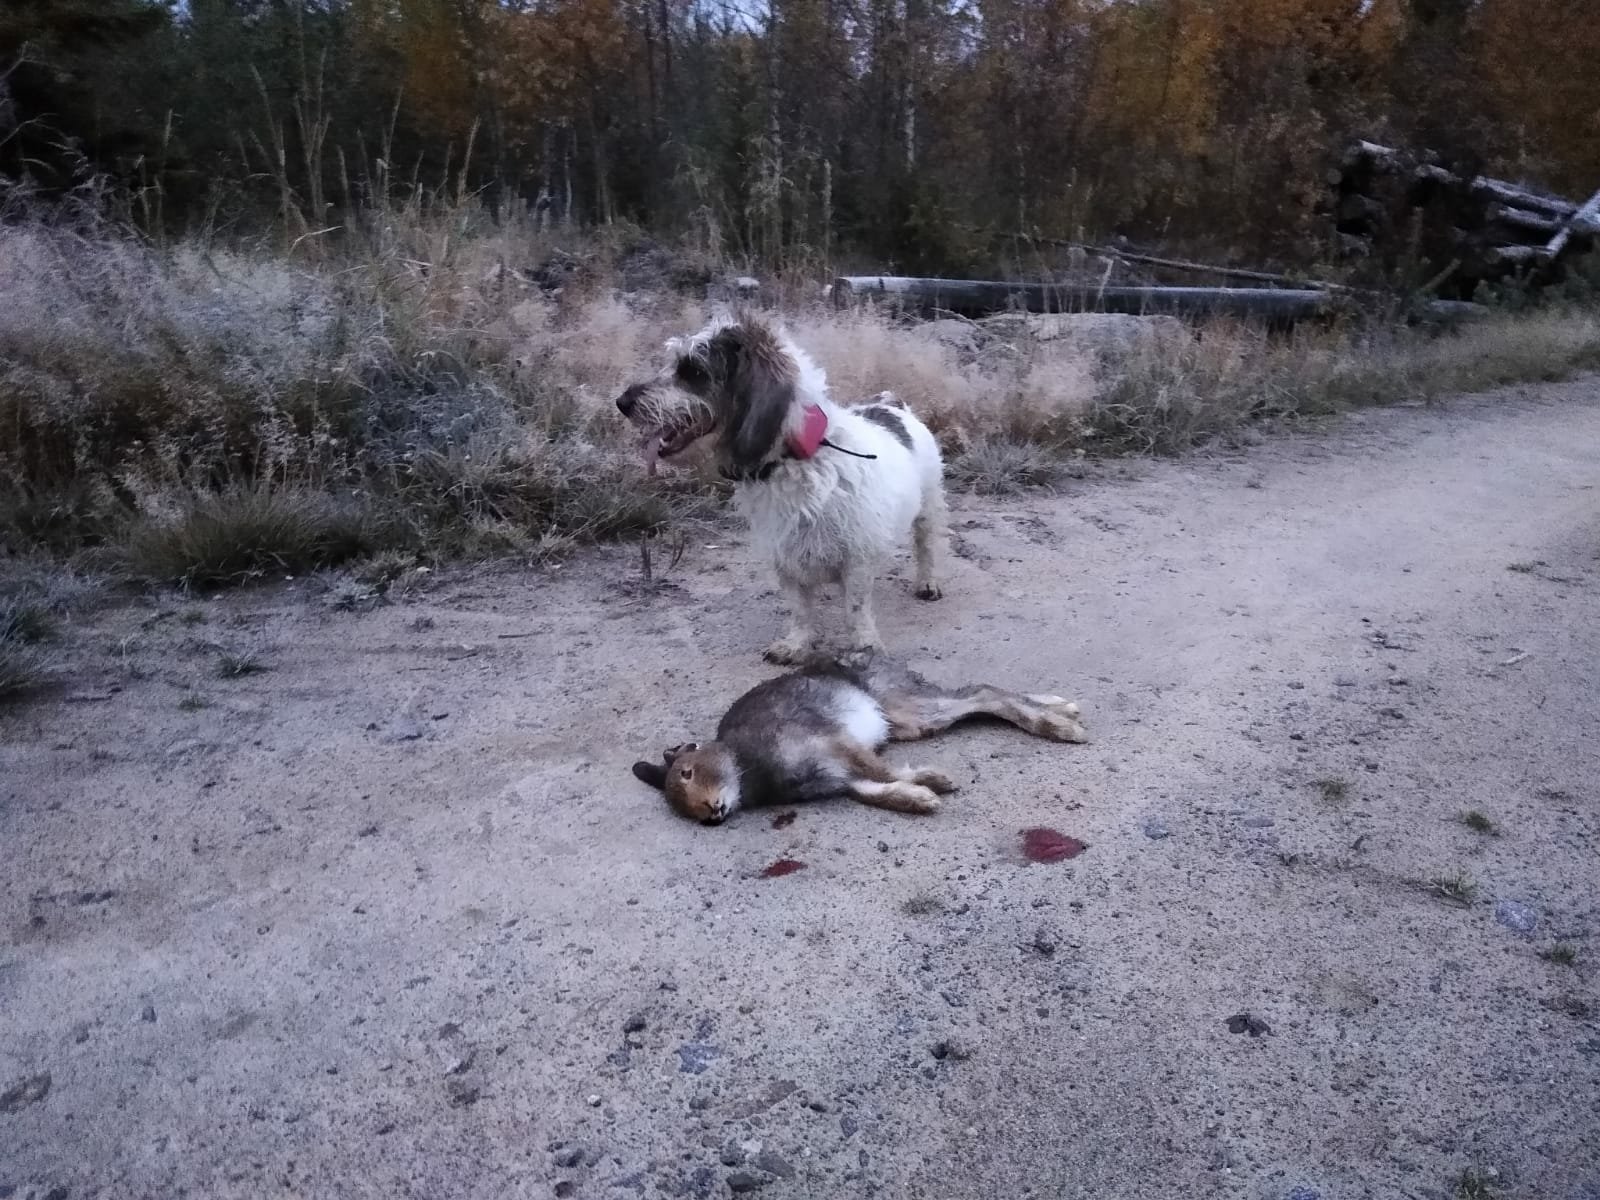 Day before Antti shoot hare to the Lempi. We find next day Deer to hunt.